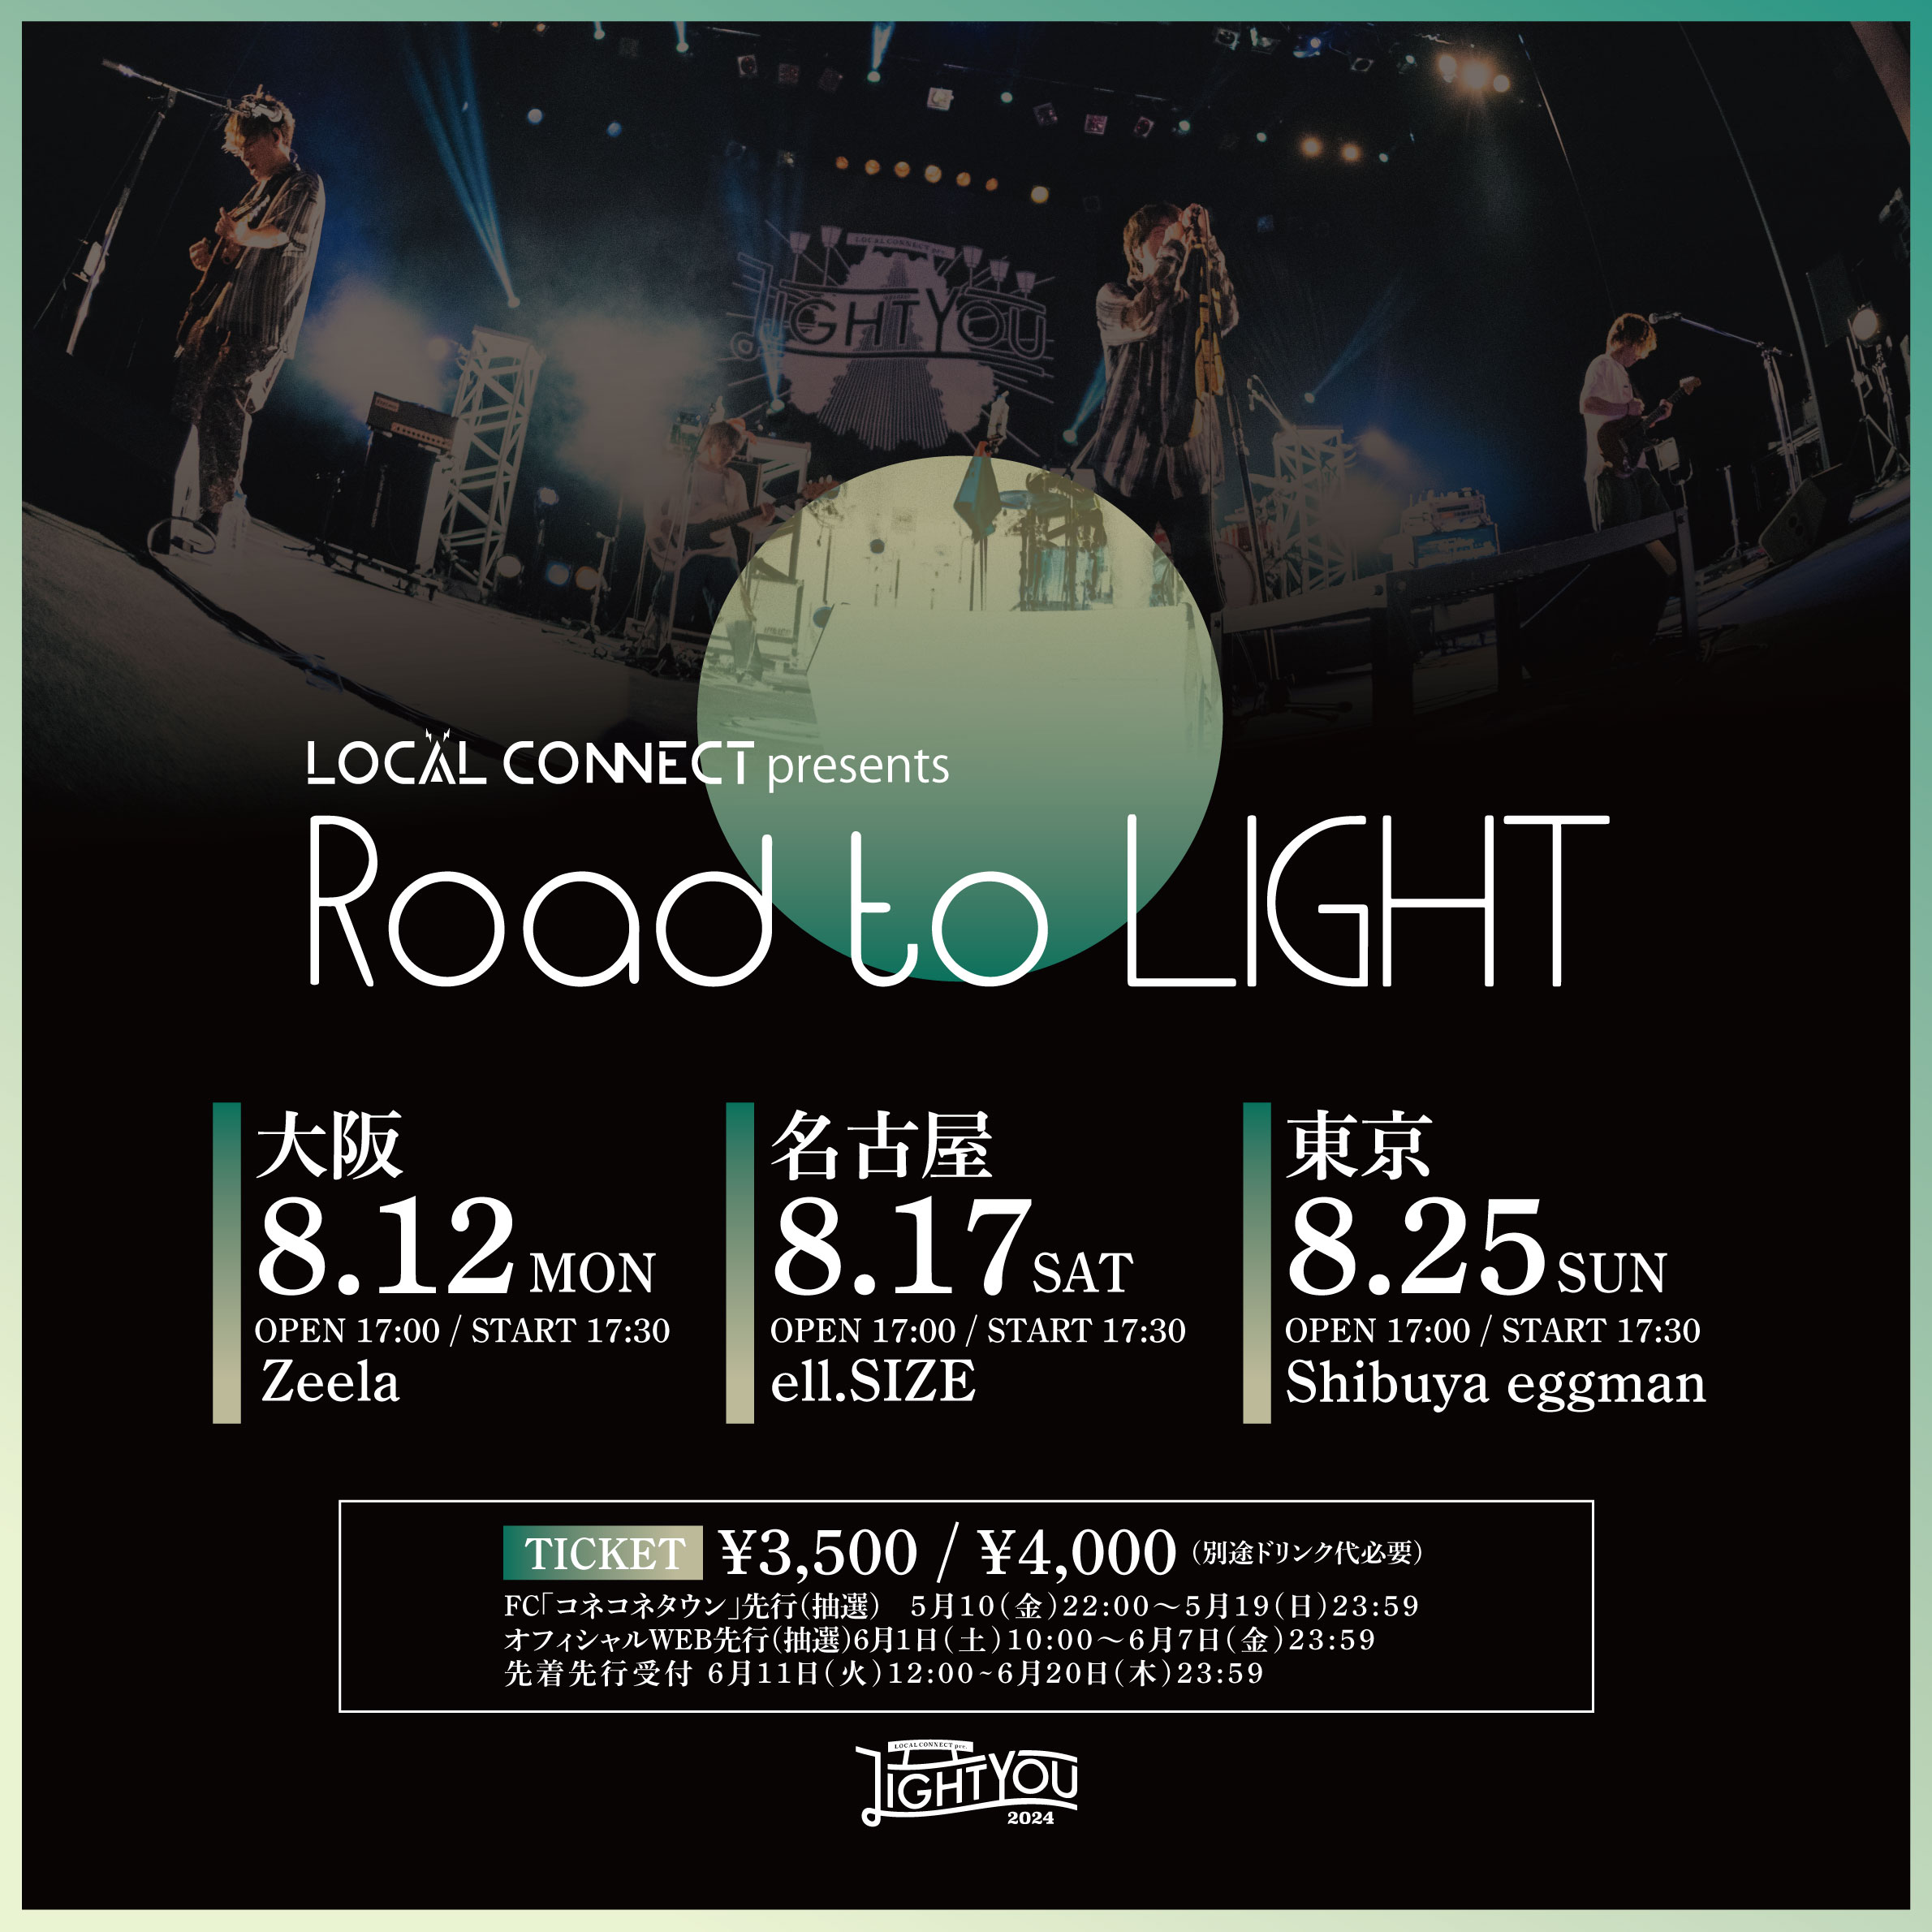 LOCAL CONNECT pre. “Road to LIGHT”